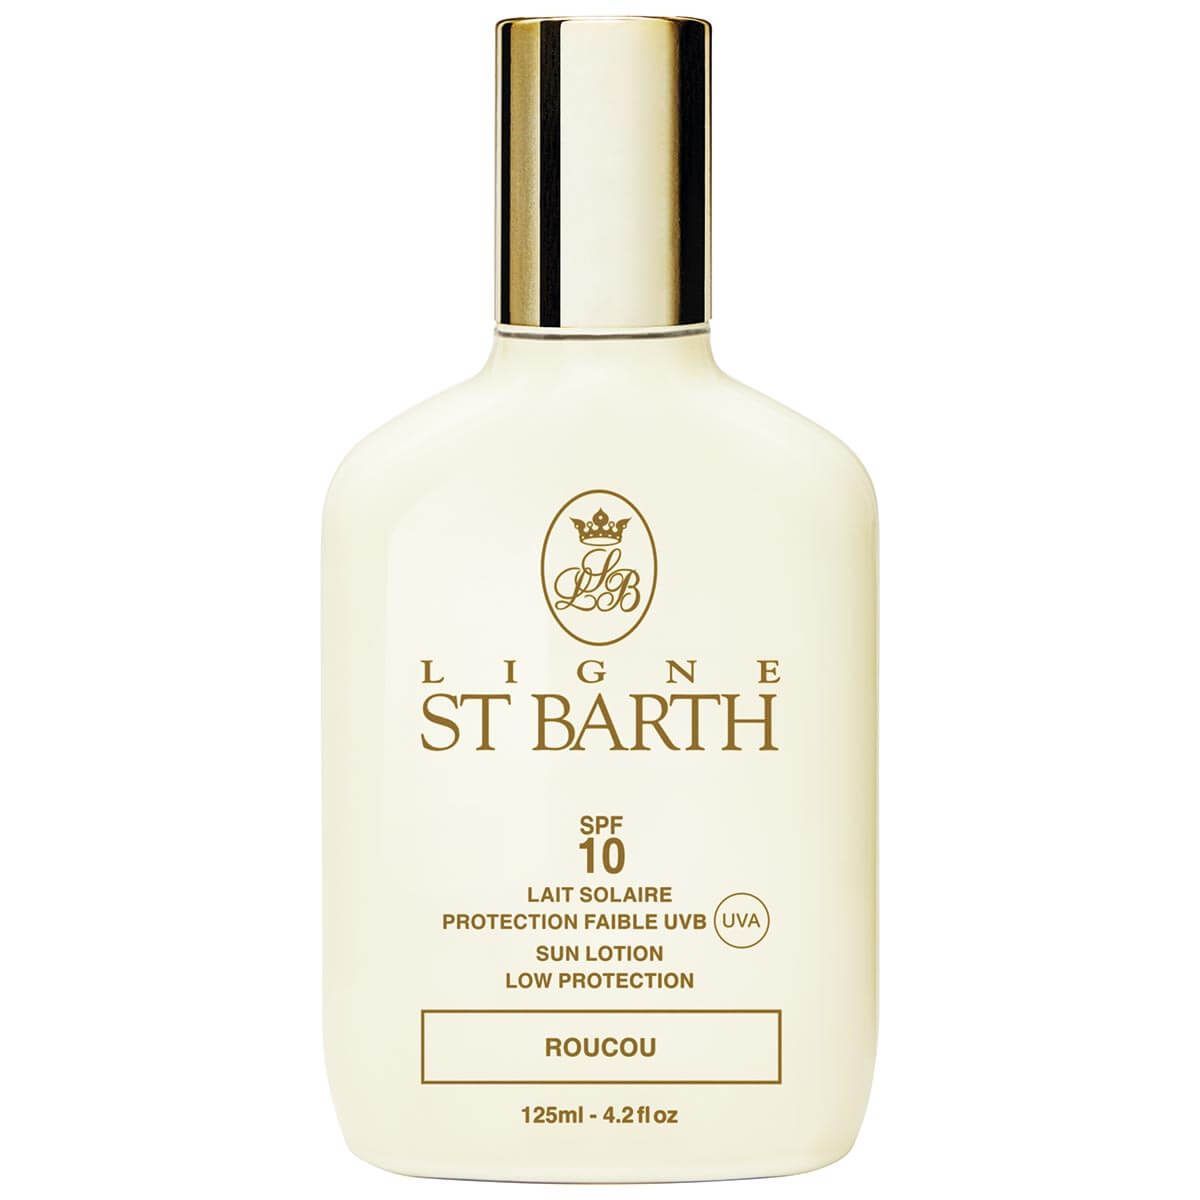 Ligne St. Barth Suscreen Lotion Roucou SPF 10